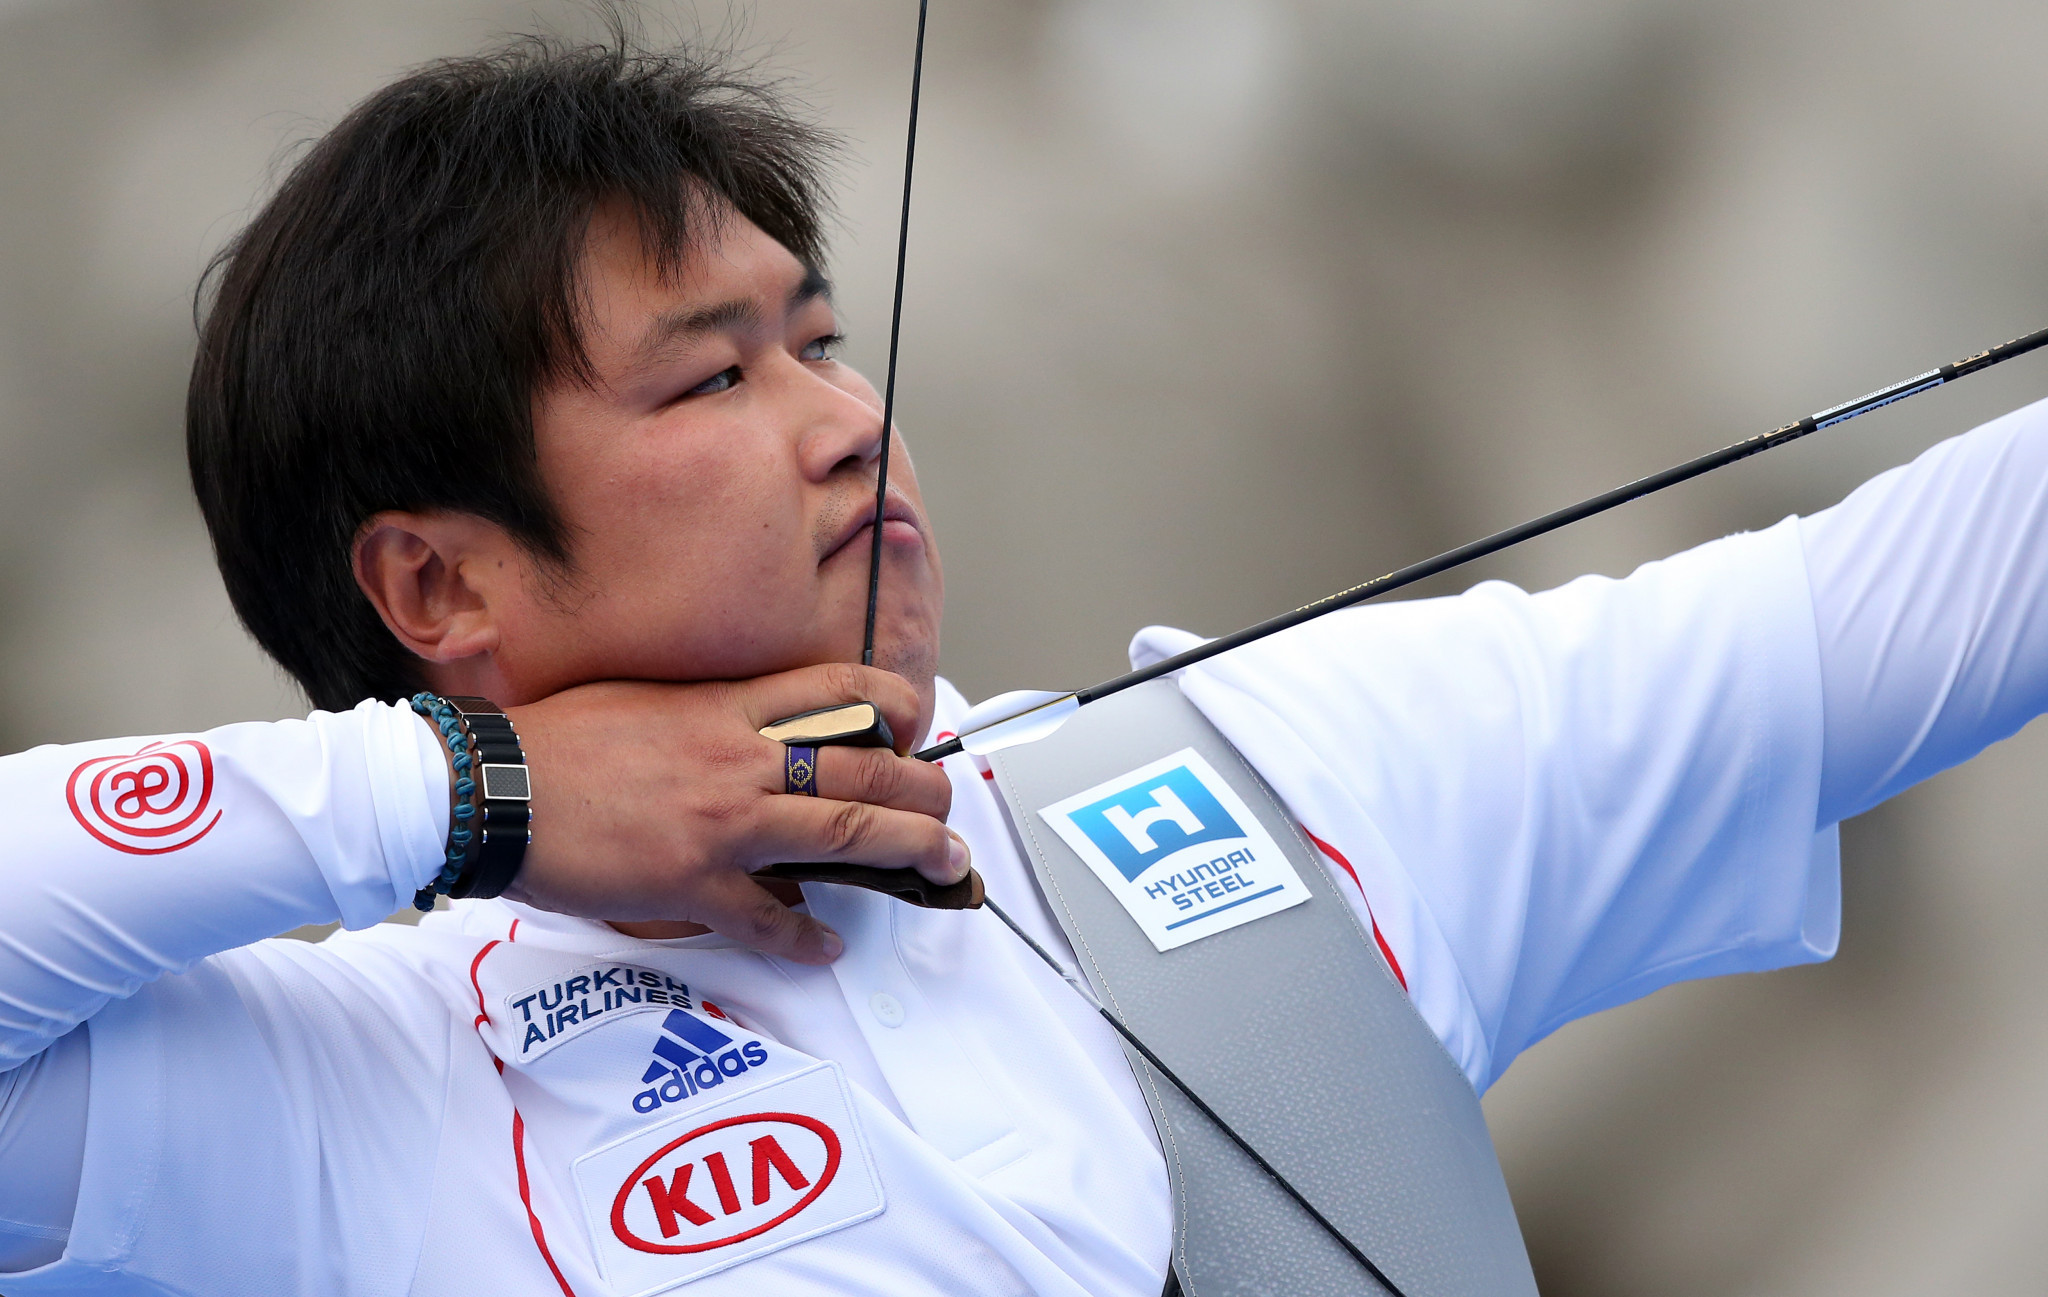 South Korean victories in recurve events at World Archery Indoor World Series in Macau